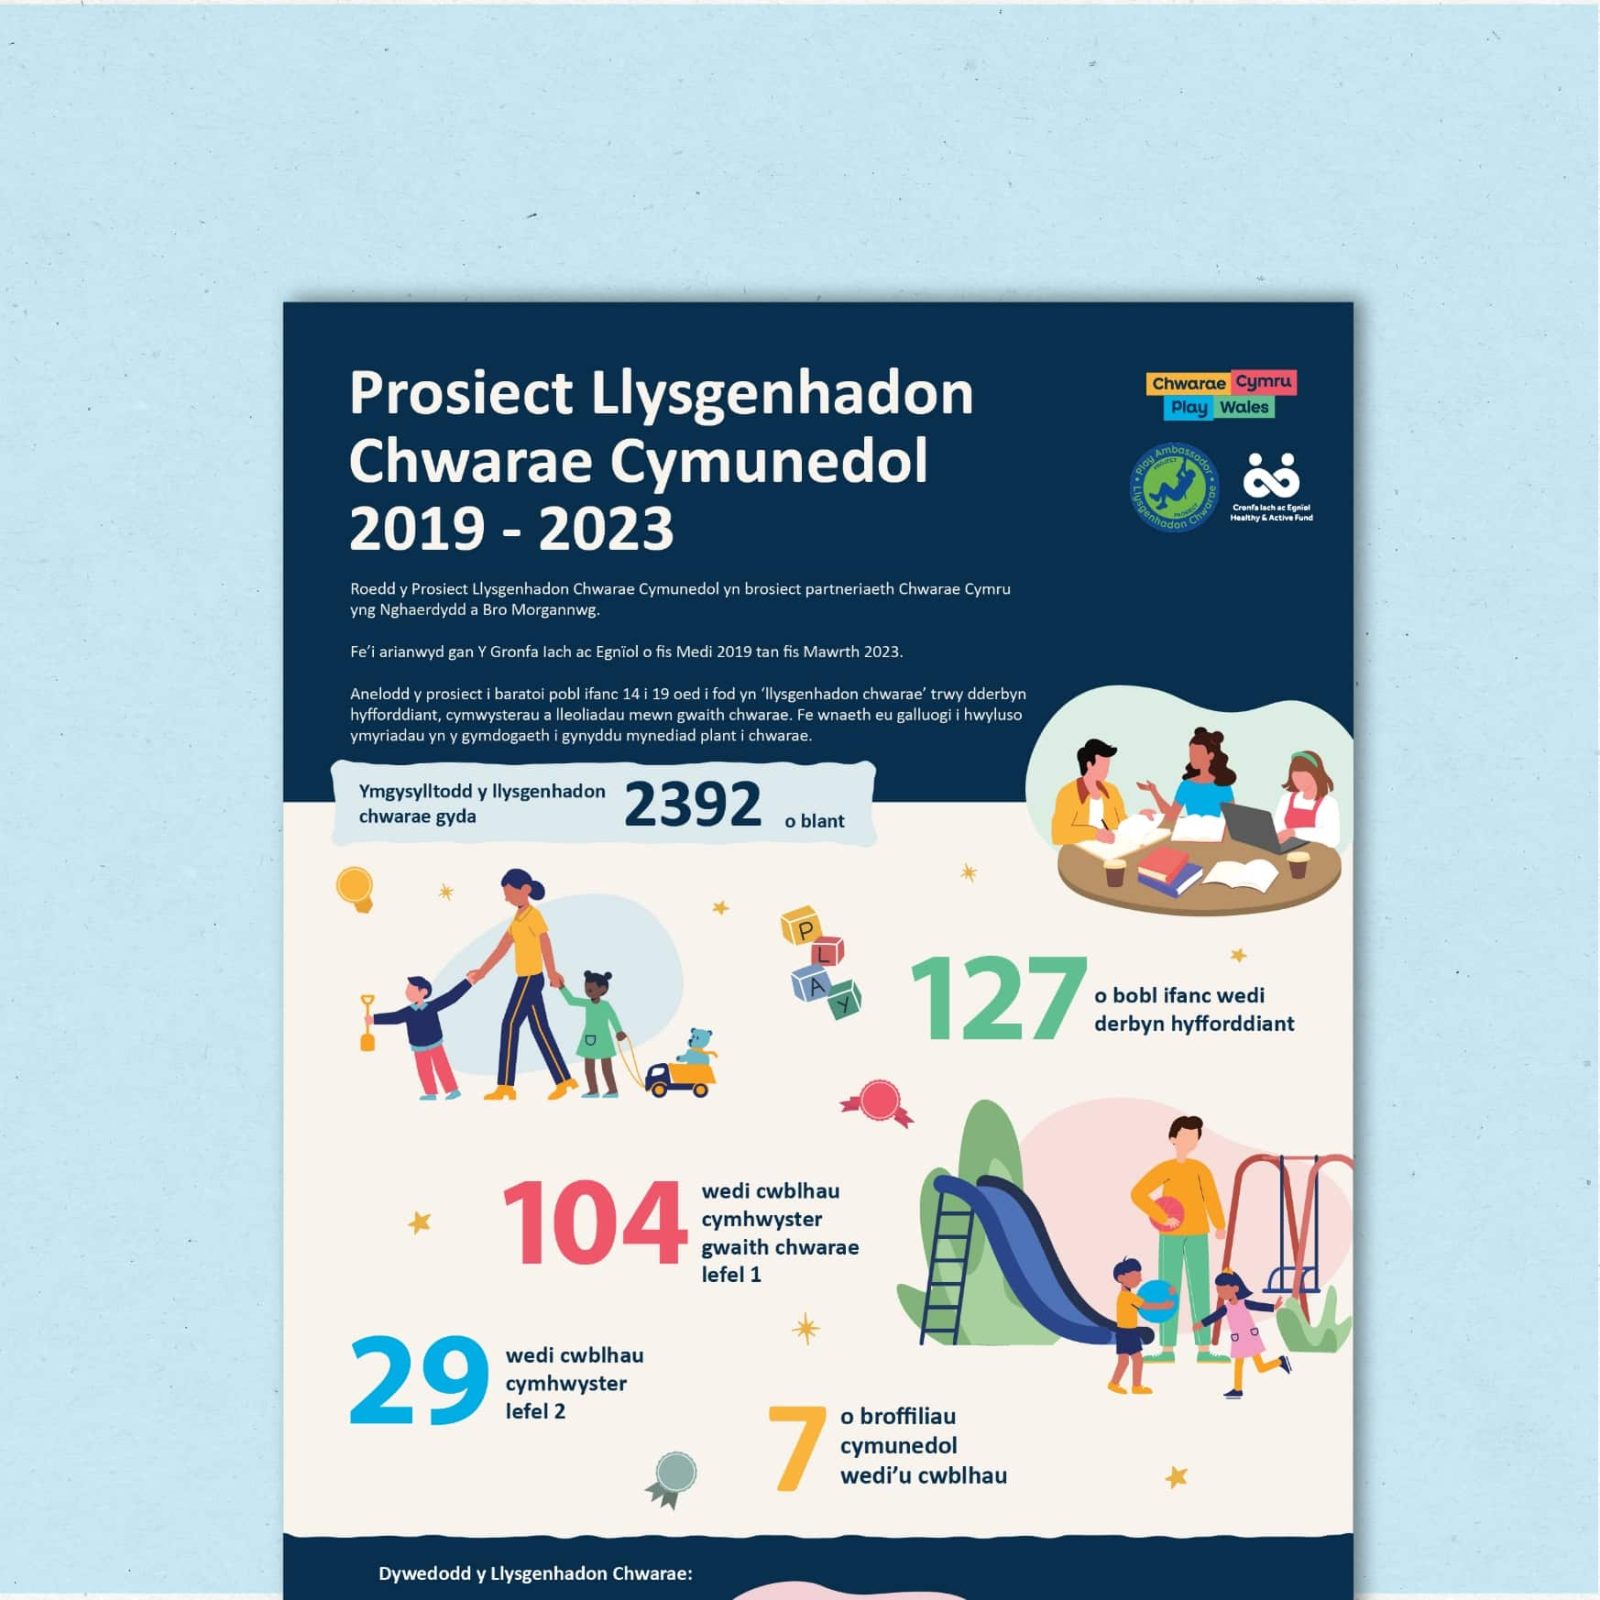 Educational poster detailing a community project with statistics, colorful graphics showing diverse people engaged in various activities, and bilingual text (Welsh and English) on a blue background, crafted by Design Agency Wales.